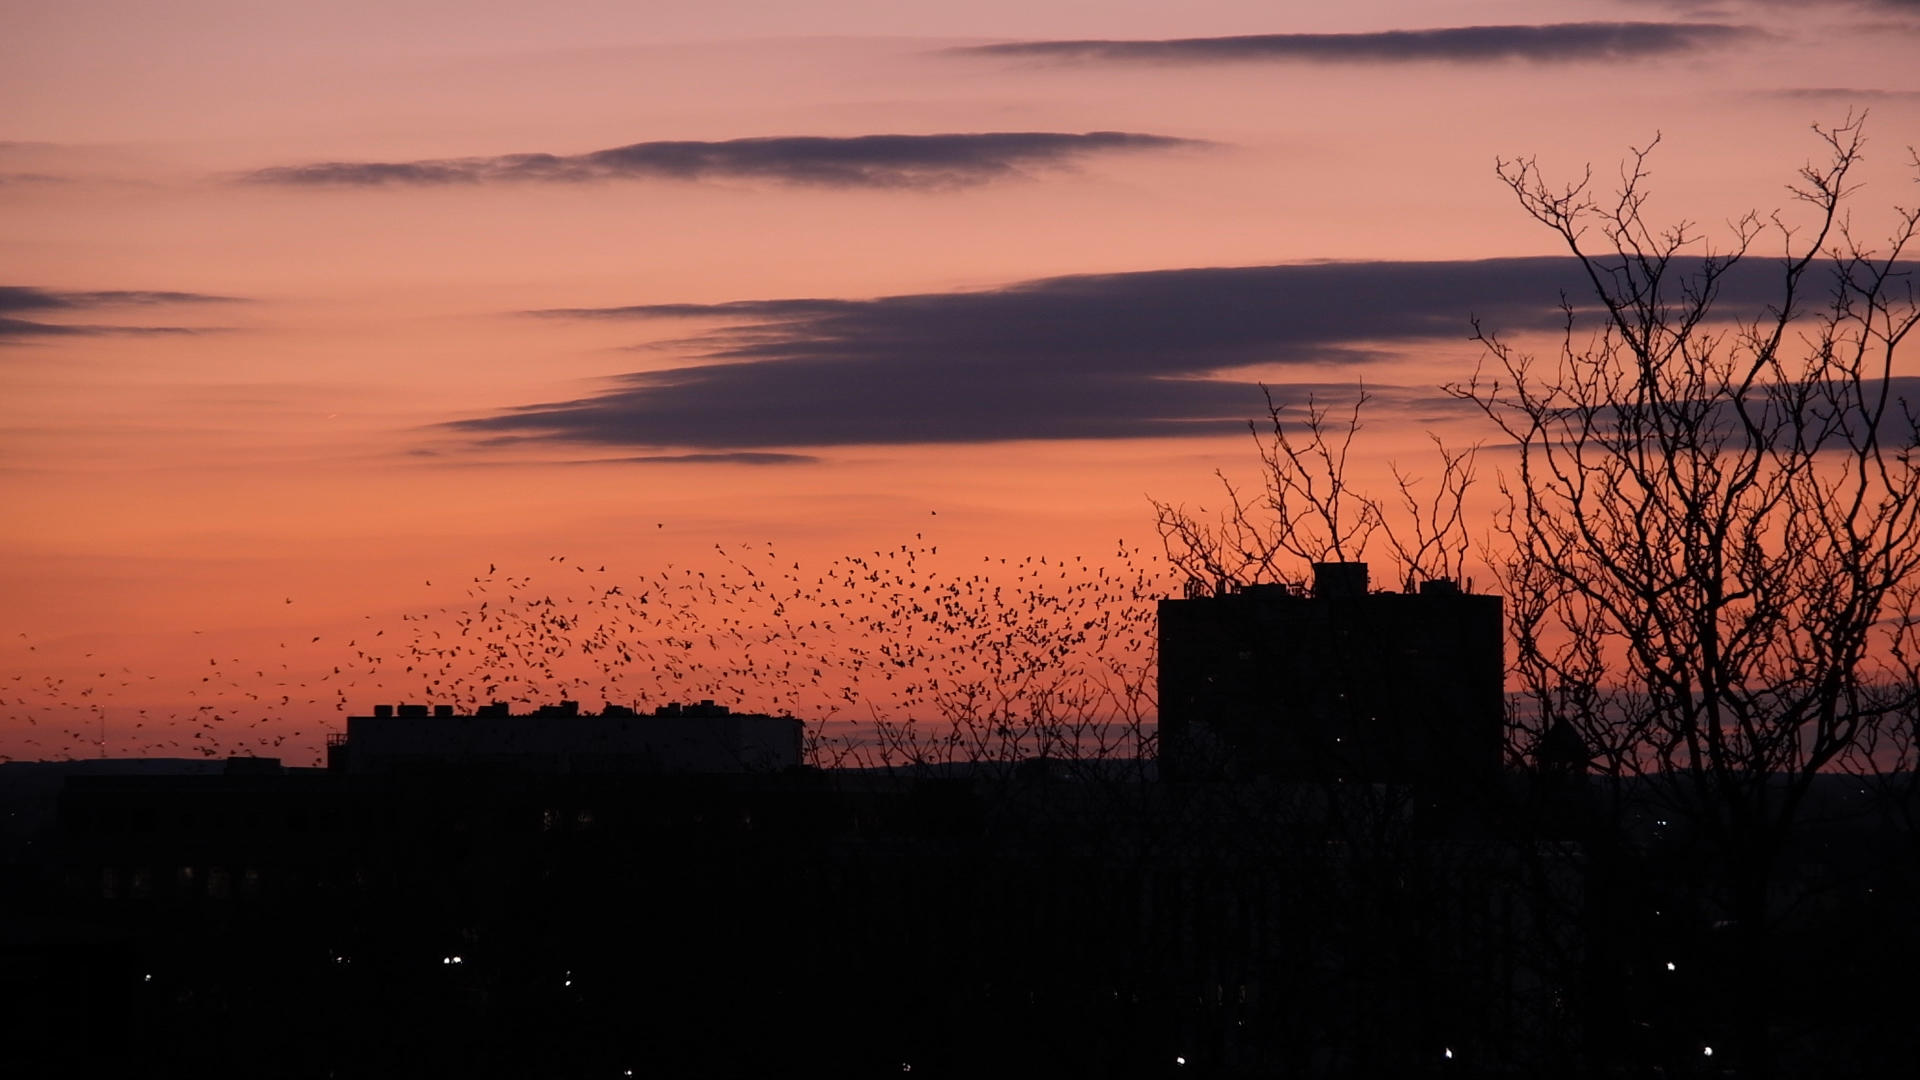 Video still of crows flying in a large group during an orange-pink sunset.